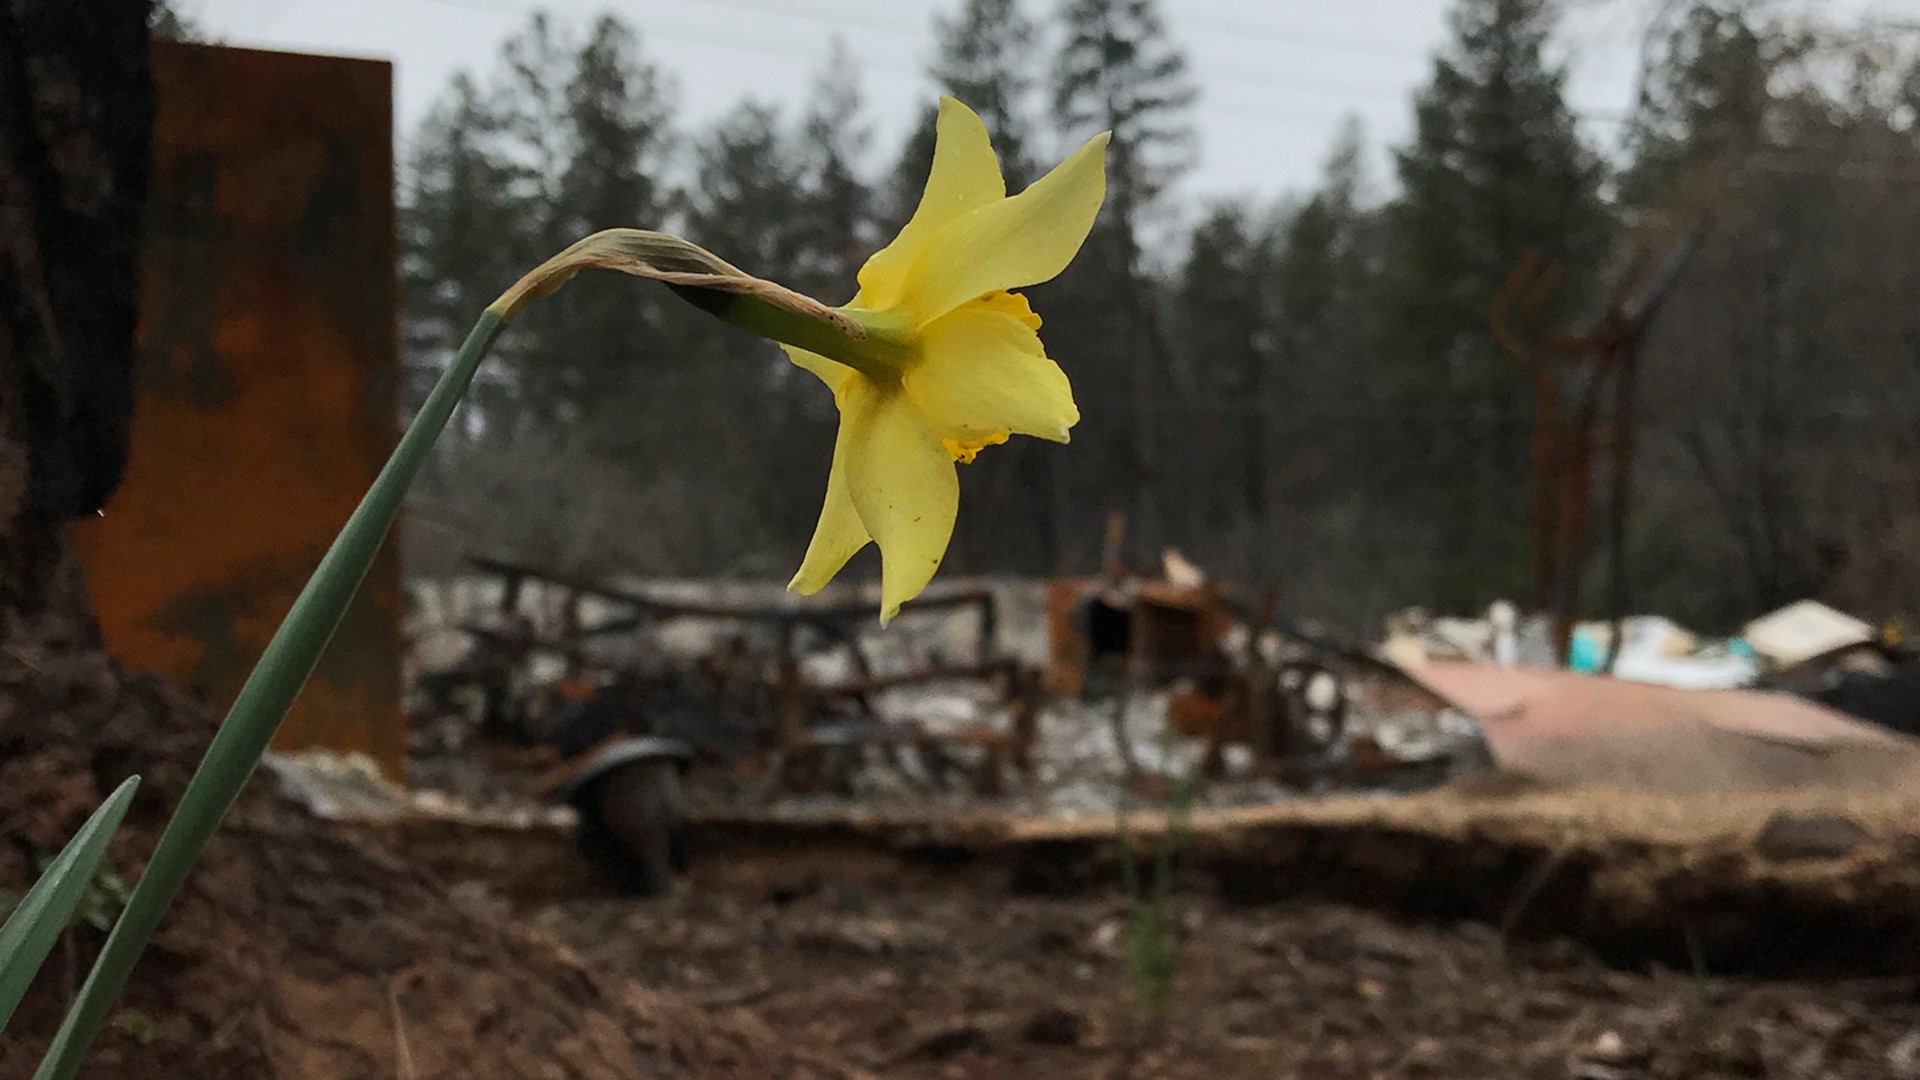 Flowers are springing up in Paradise, California. It's a sign of new life, just four months after the Camp Fire destroyed much of the town and killed at least 85 people.